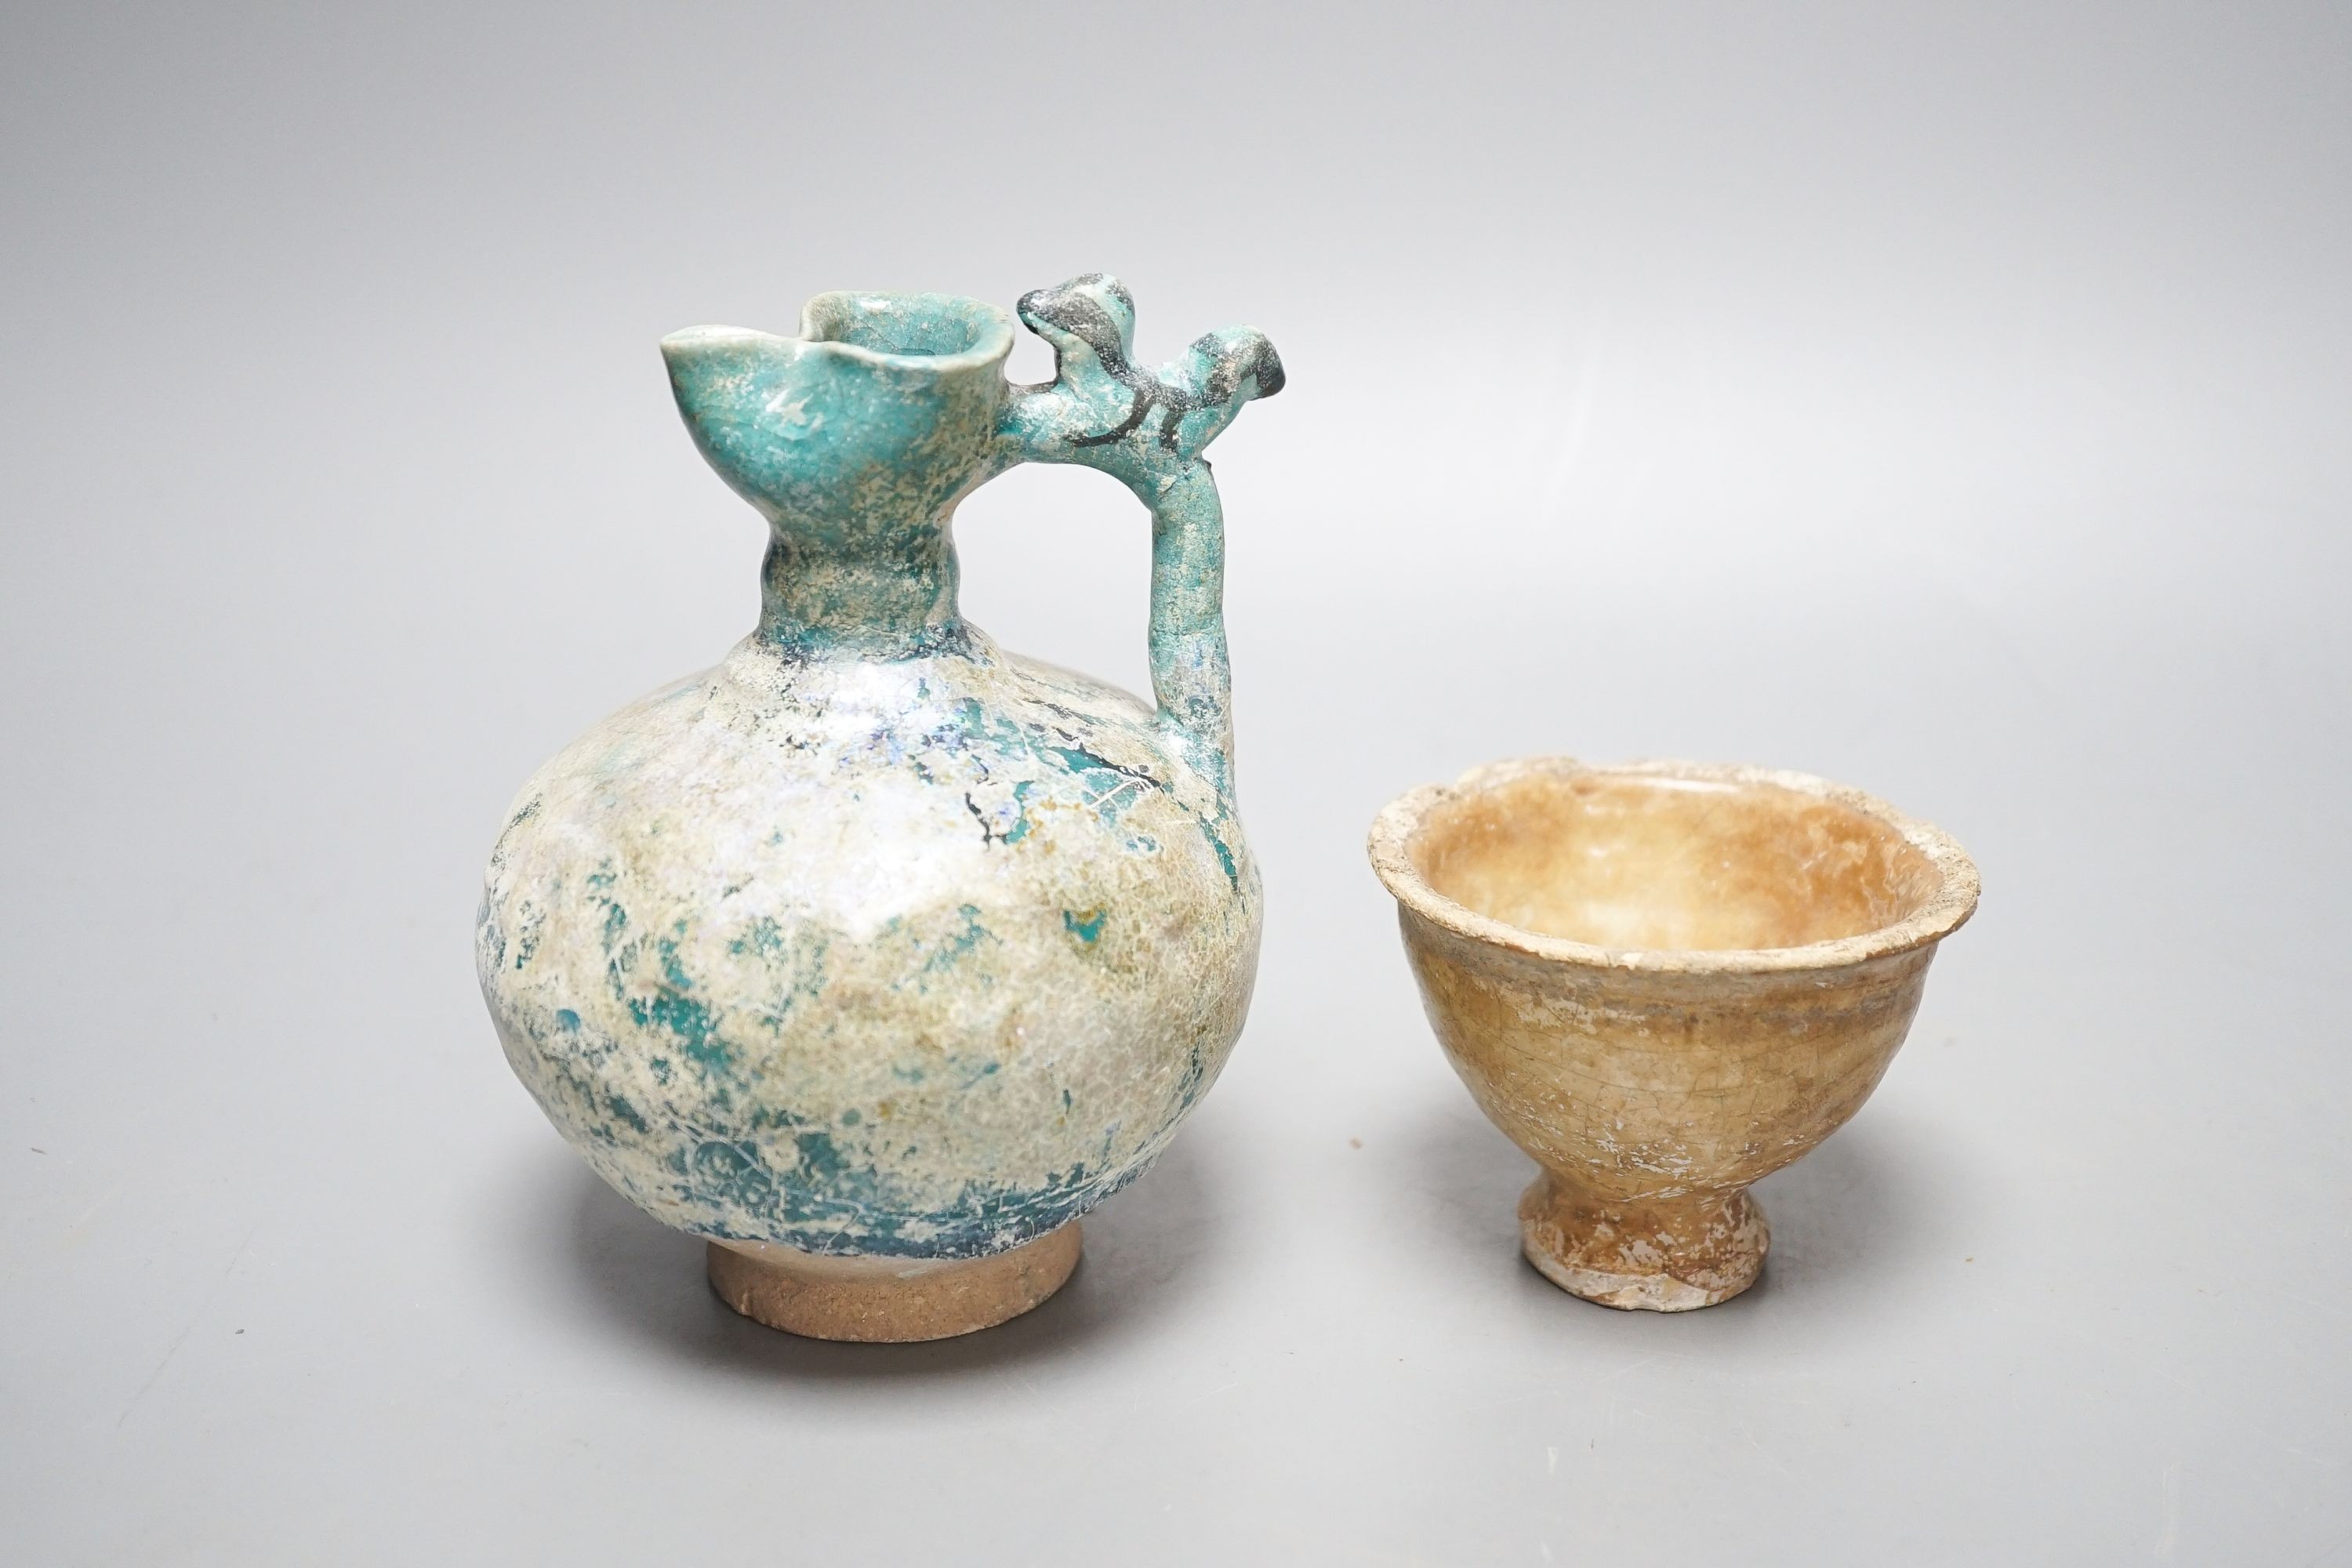 A Kashan turquoise glazed pottery ewer, 14th century, with mineral iridescence and an early Islamic pottery cup 14cm